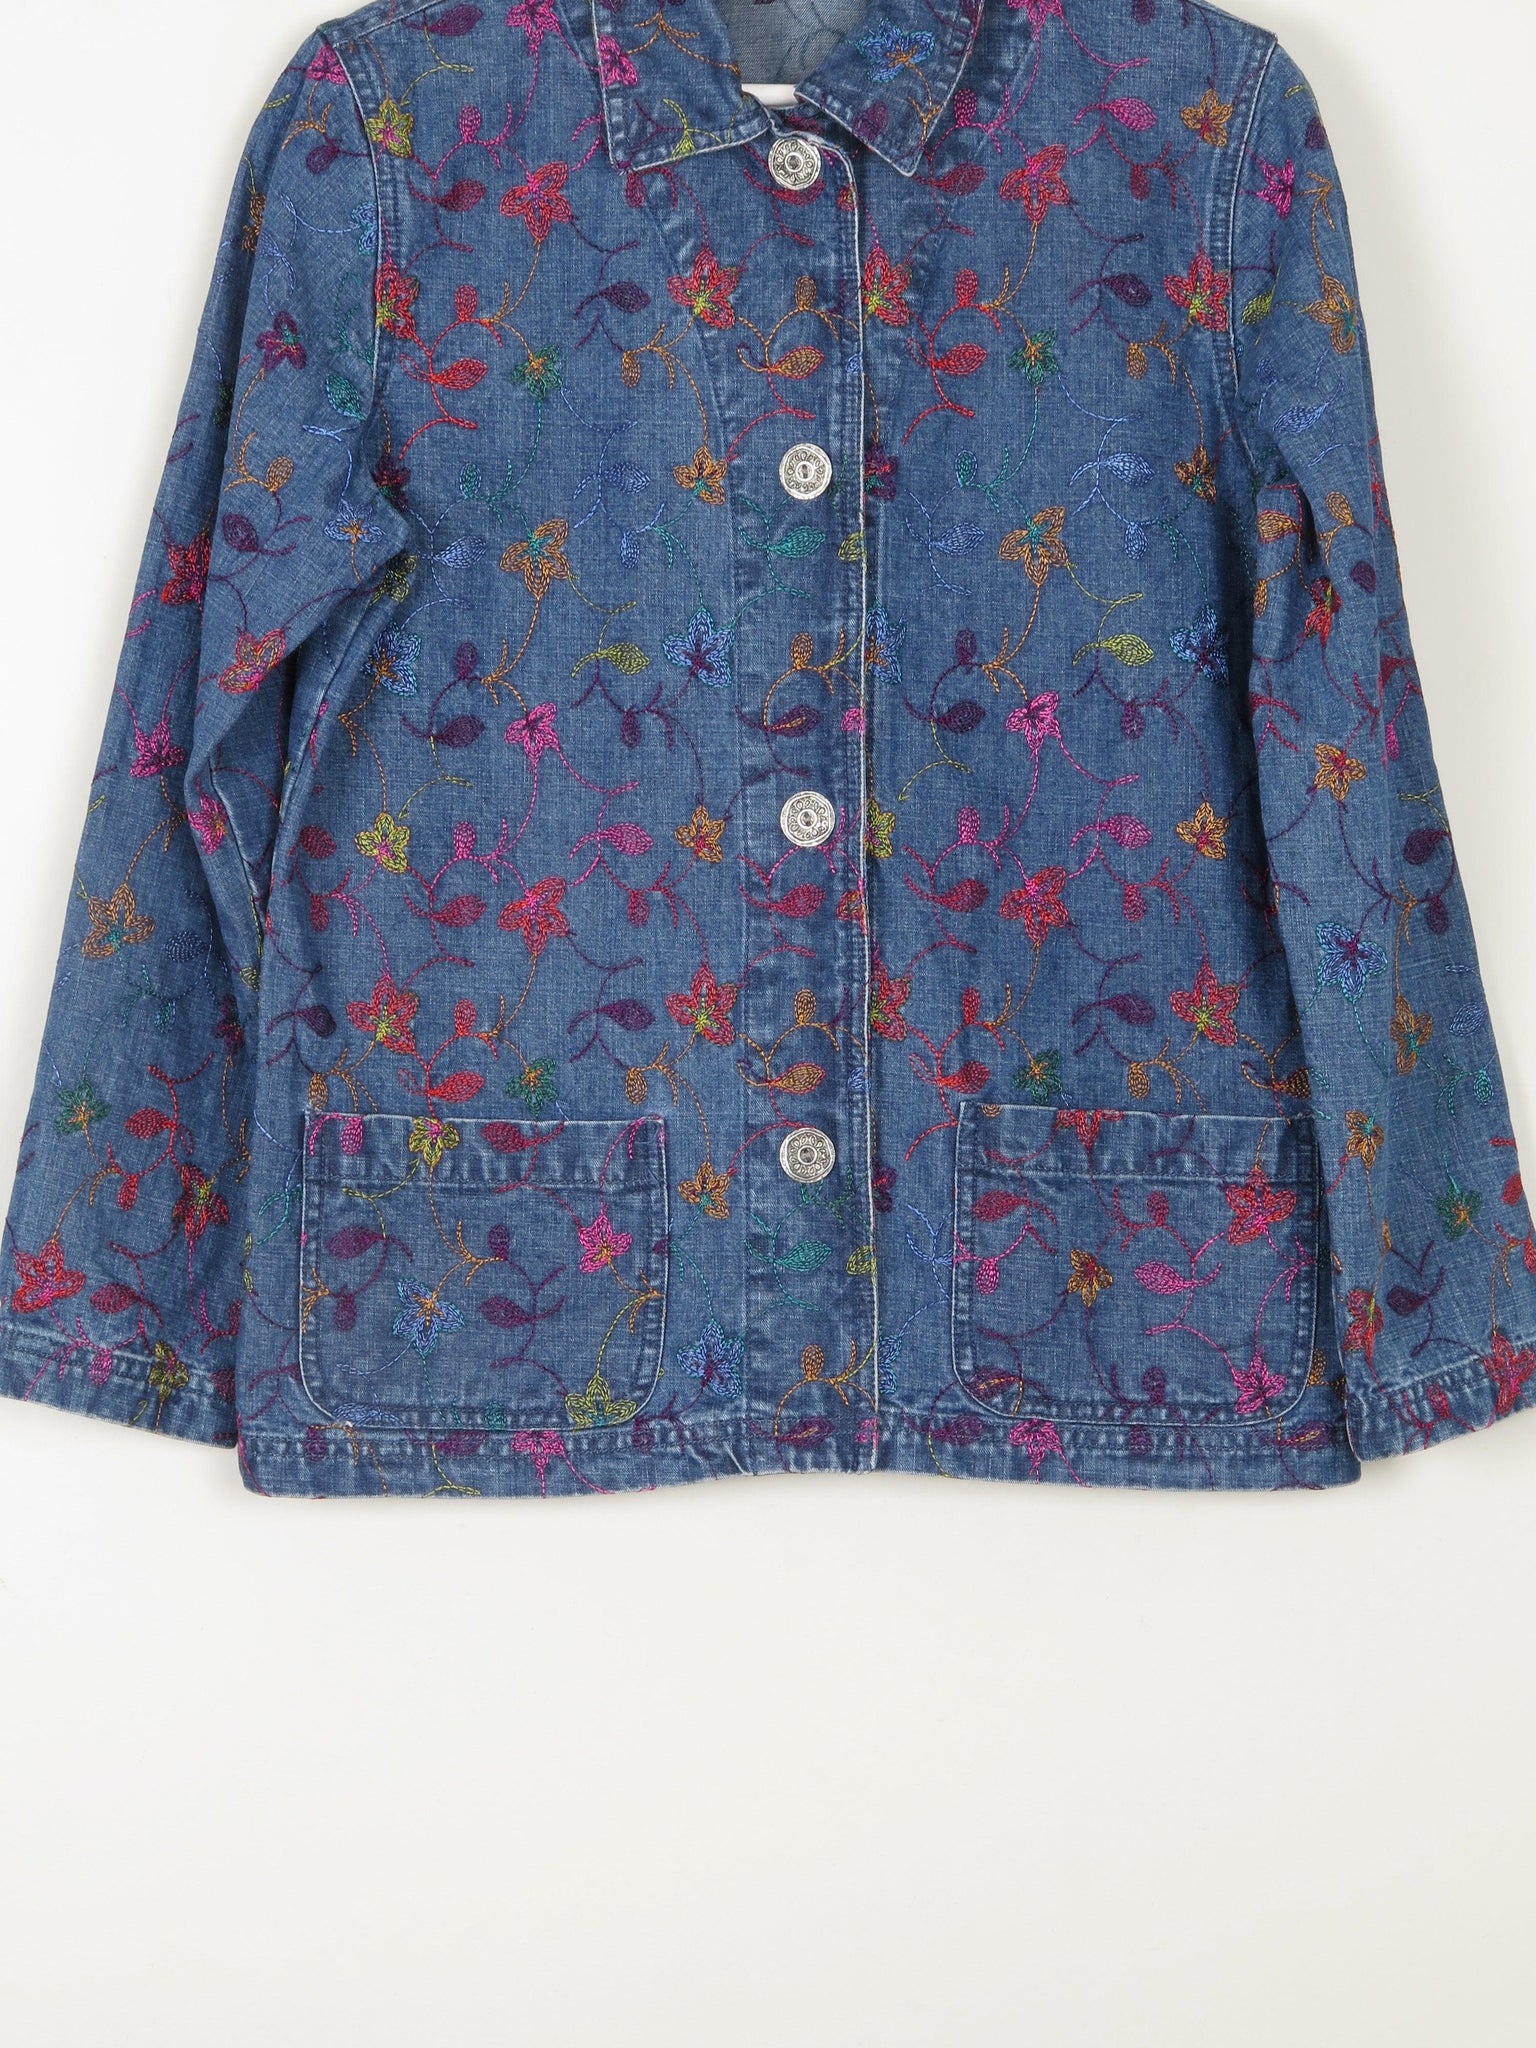 Women's Embroidered Denim Chore Style Jacket S